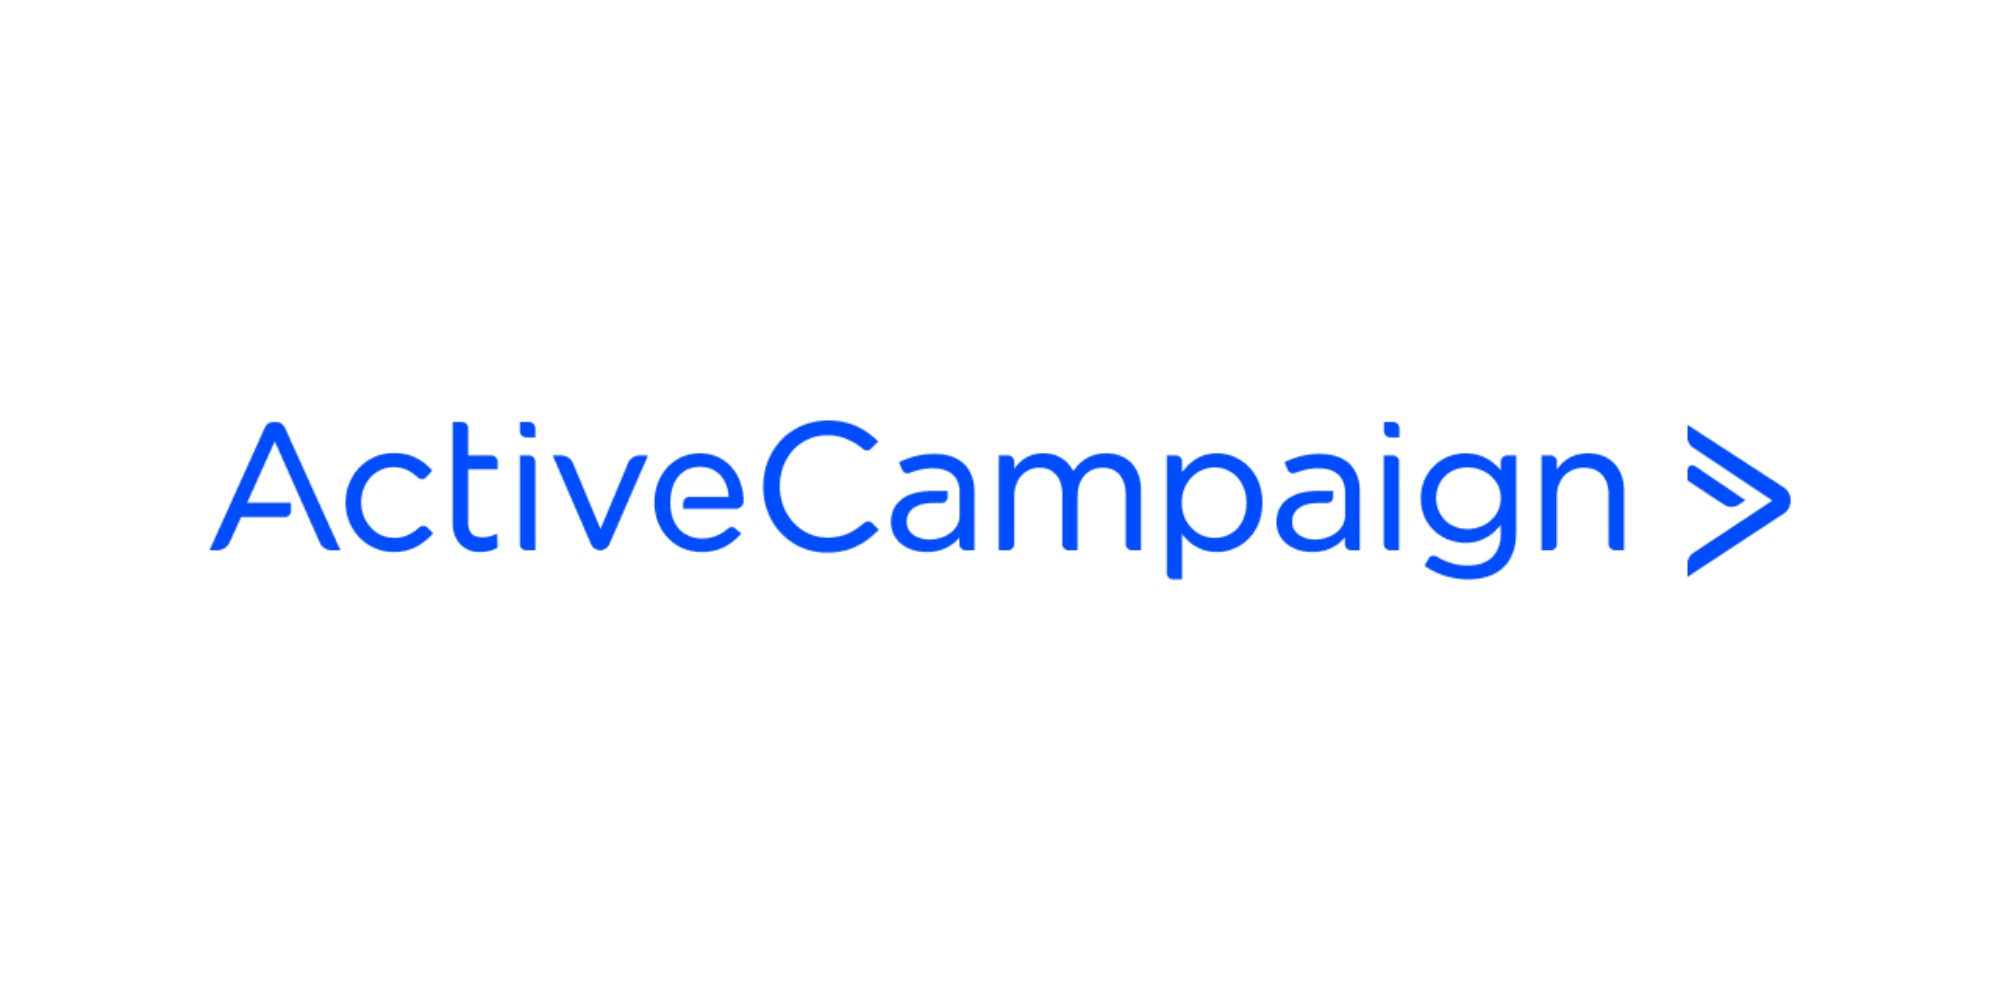 ActiveCampaign is a great Mailchimp alternative for churches